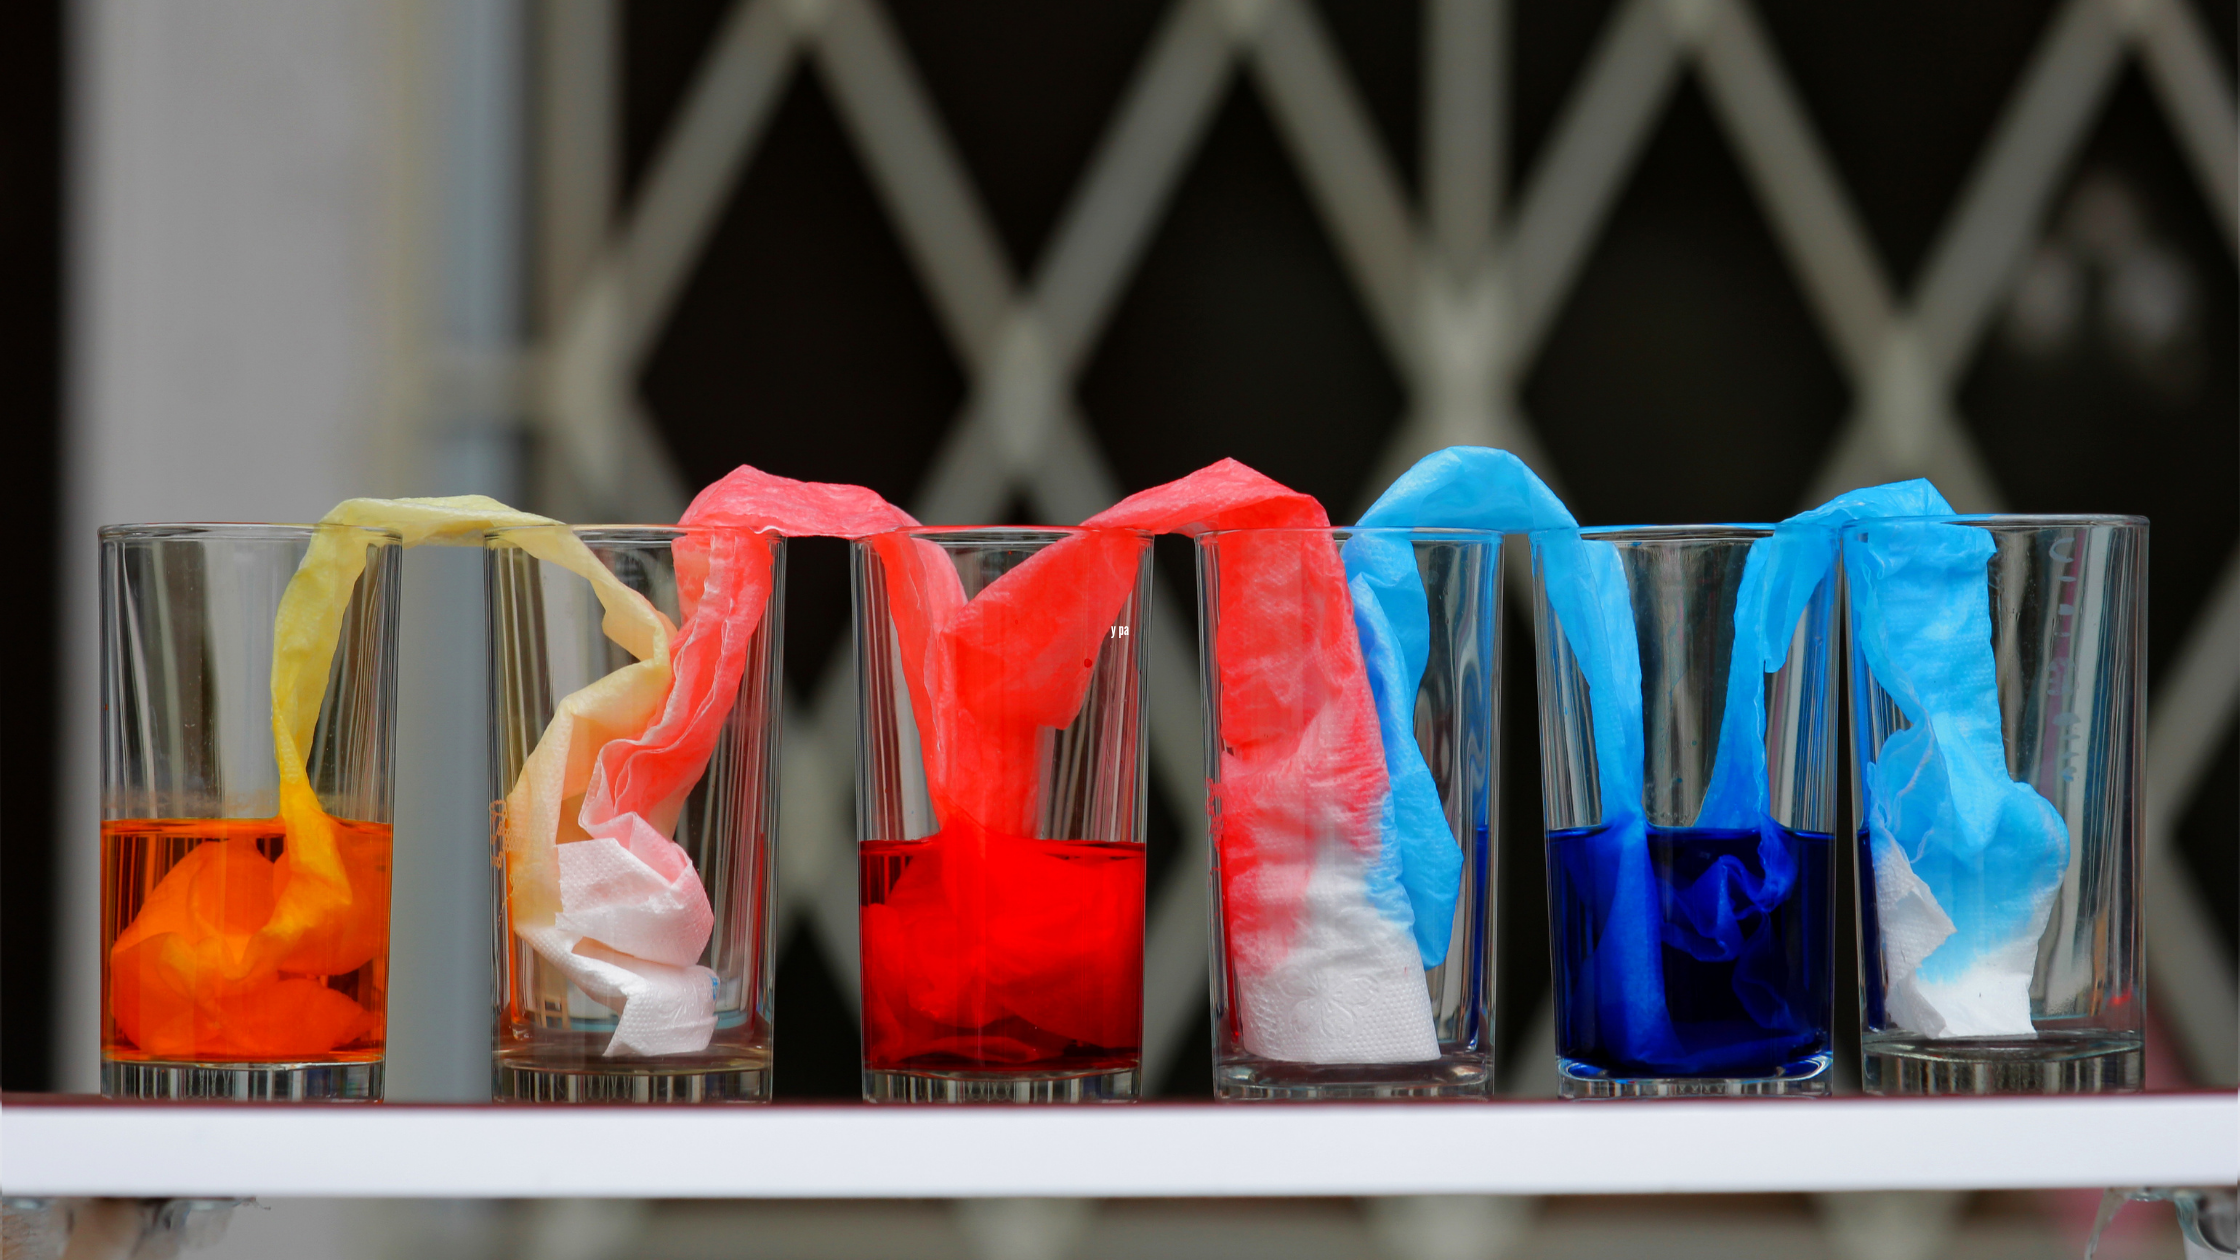 5 Fun & Cool Science Activities with Dye to Do With the Kids 16